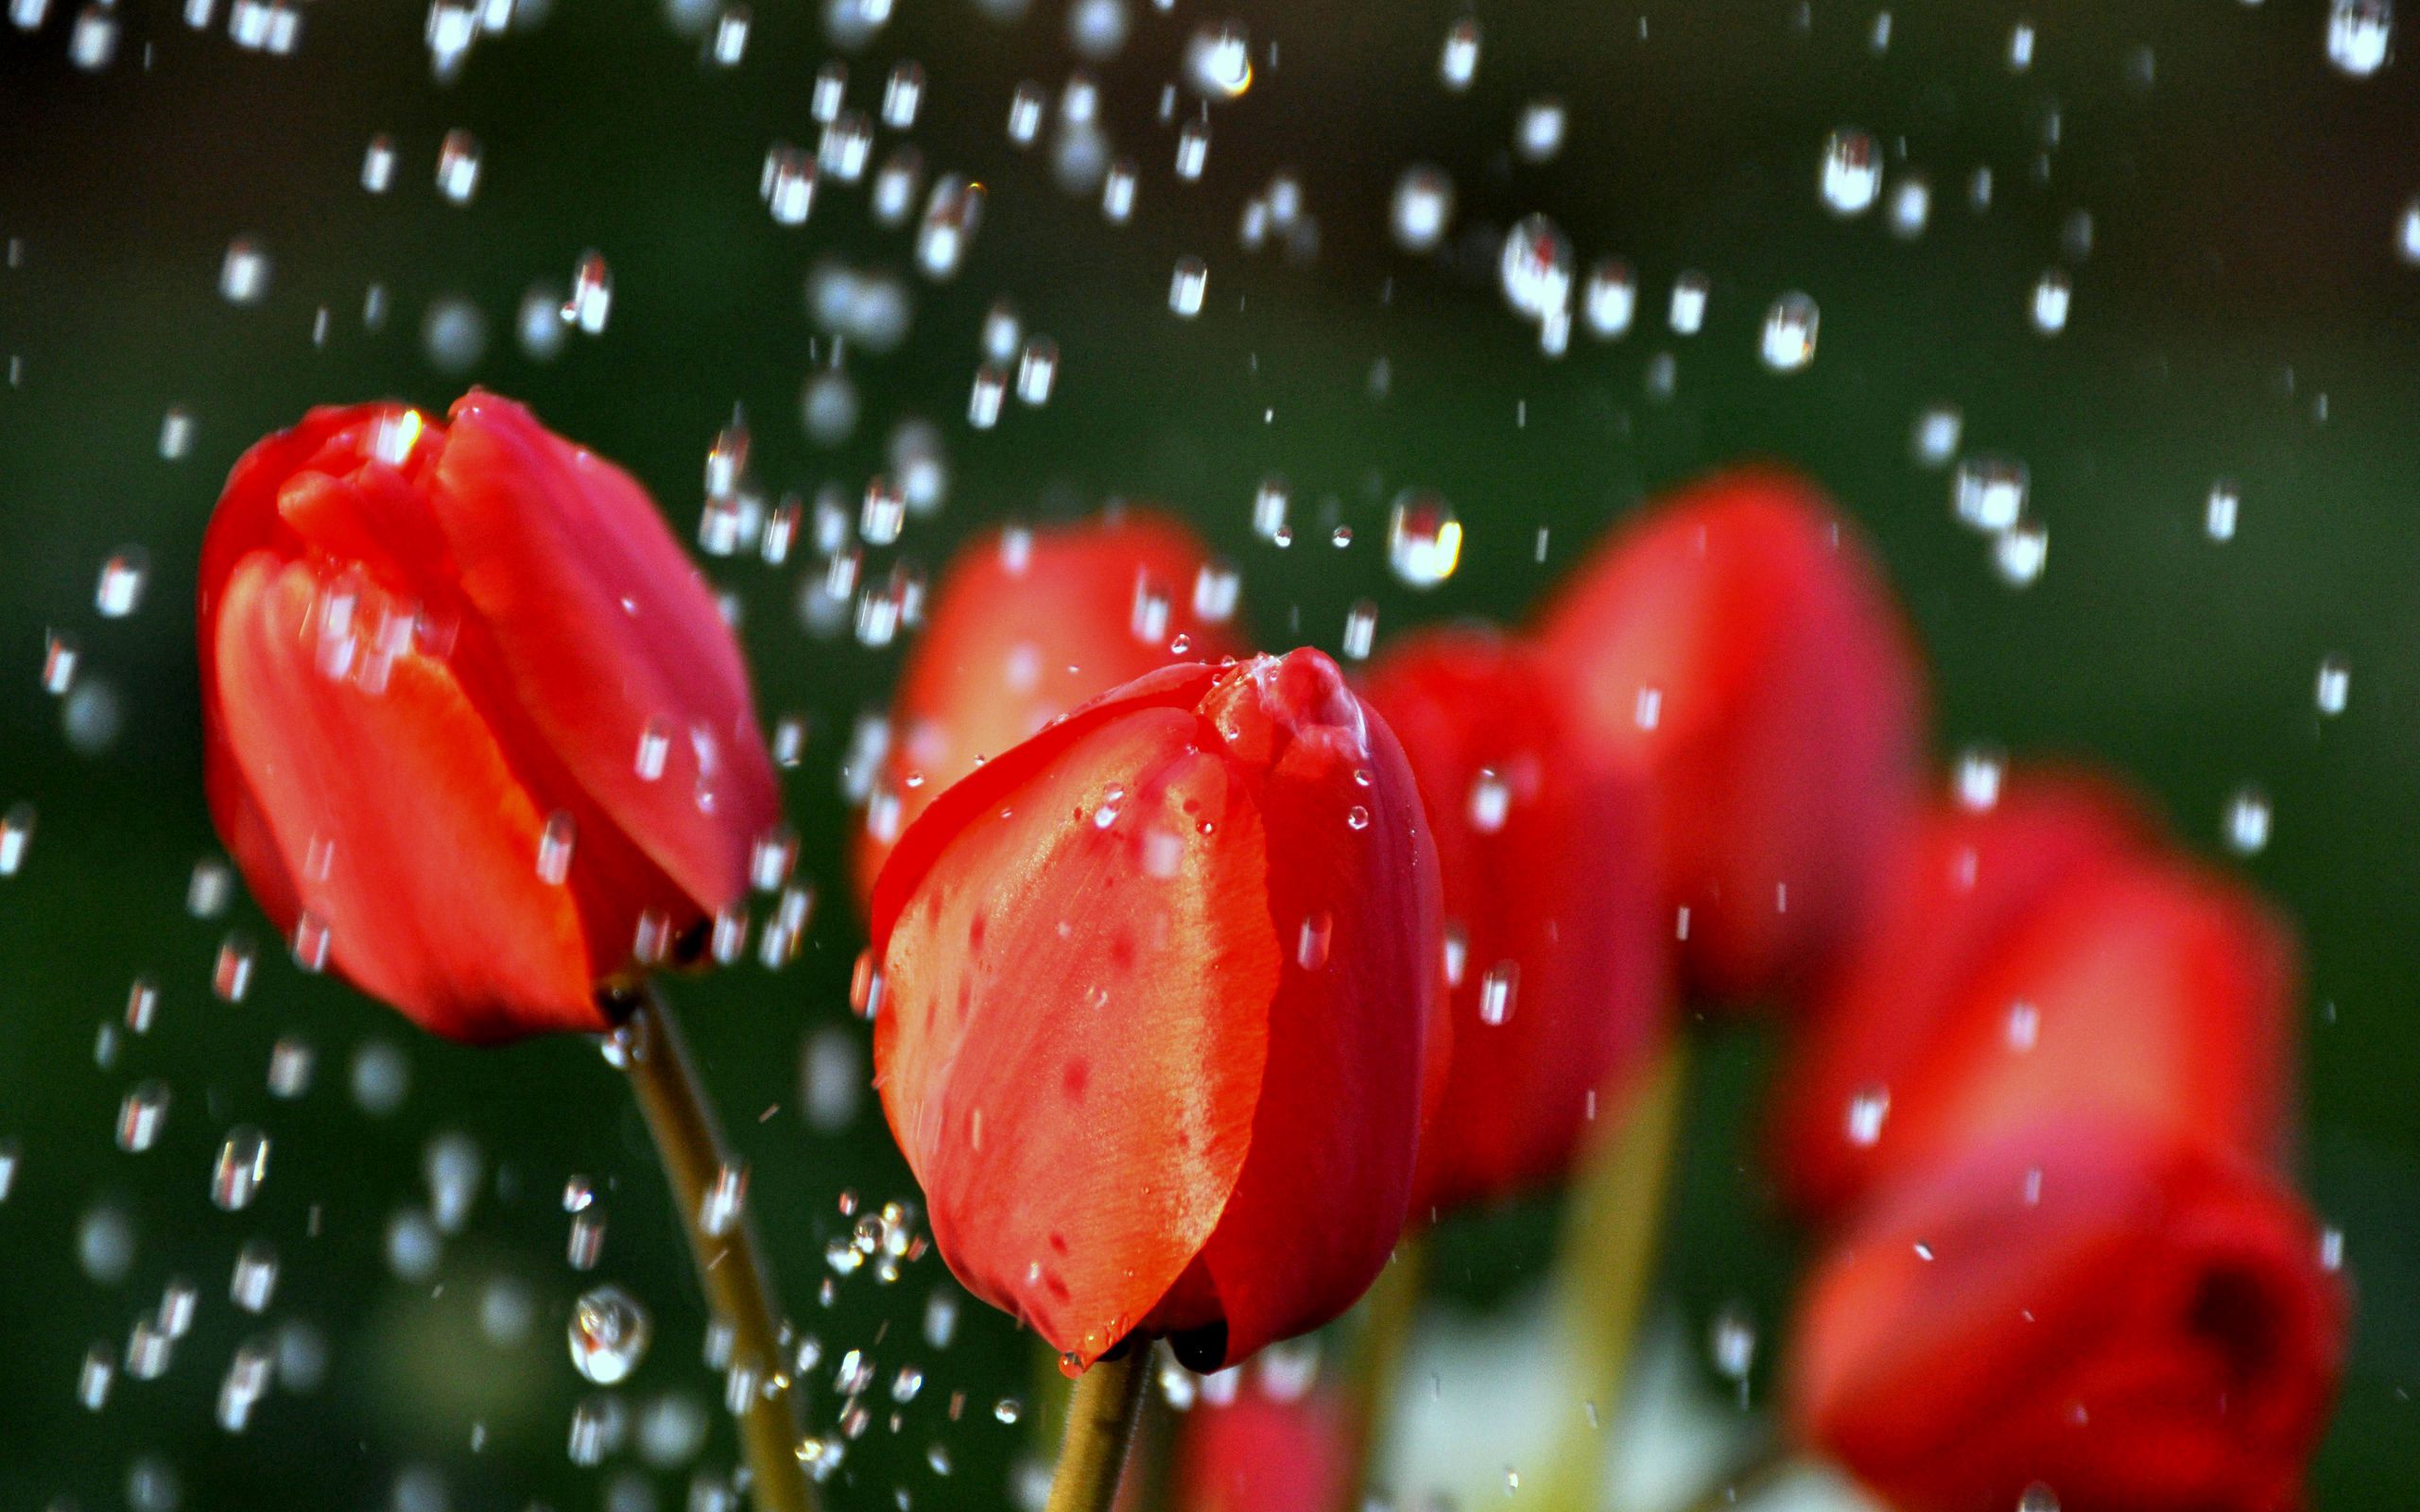 53911 download wallpaper tulips, flowers, drops, blur, smooth, buds screensavers and pictures for free